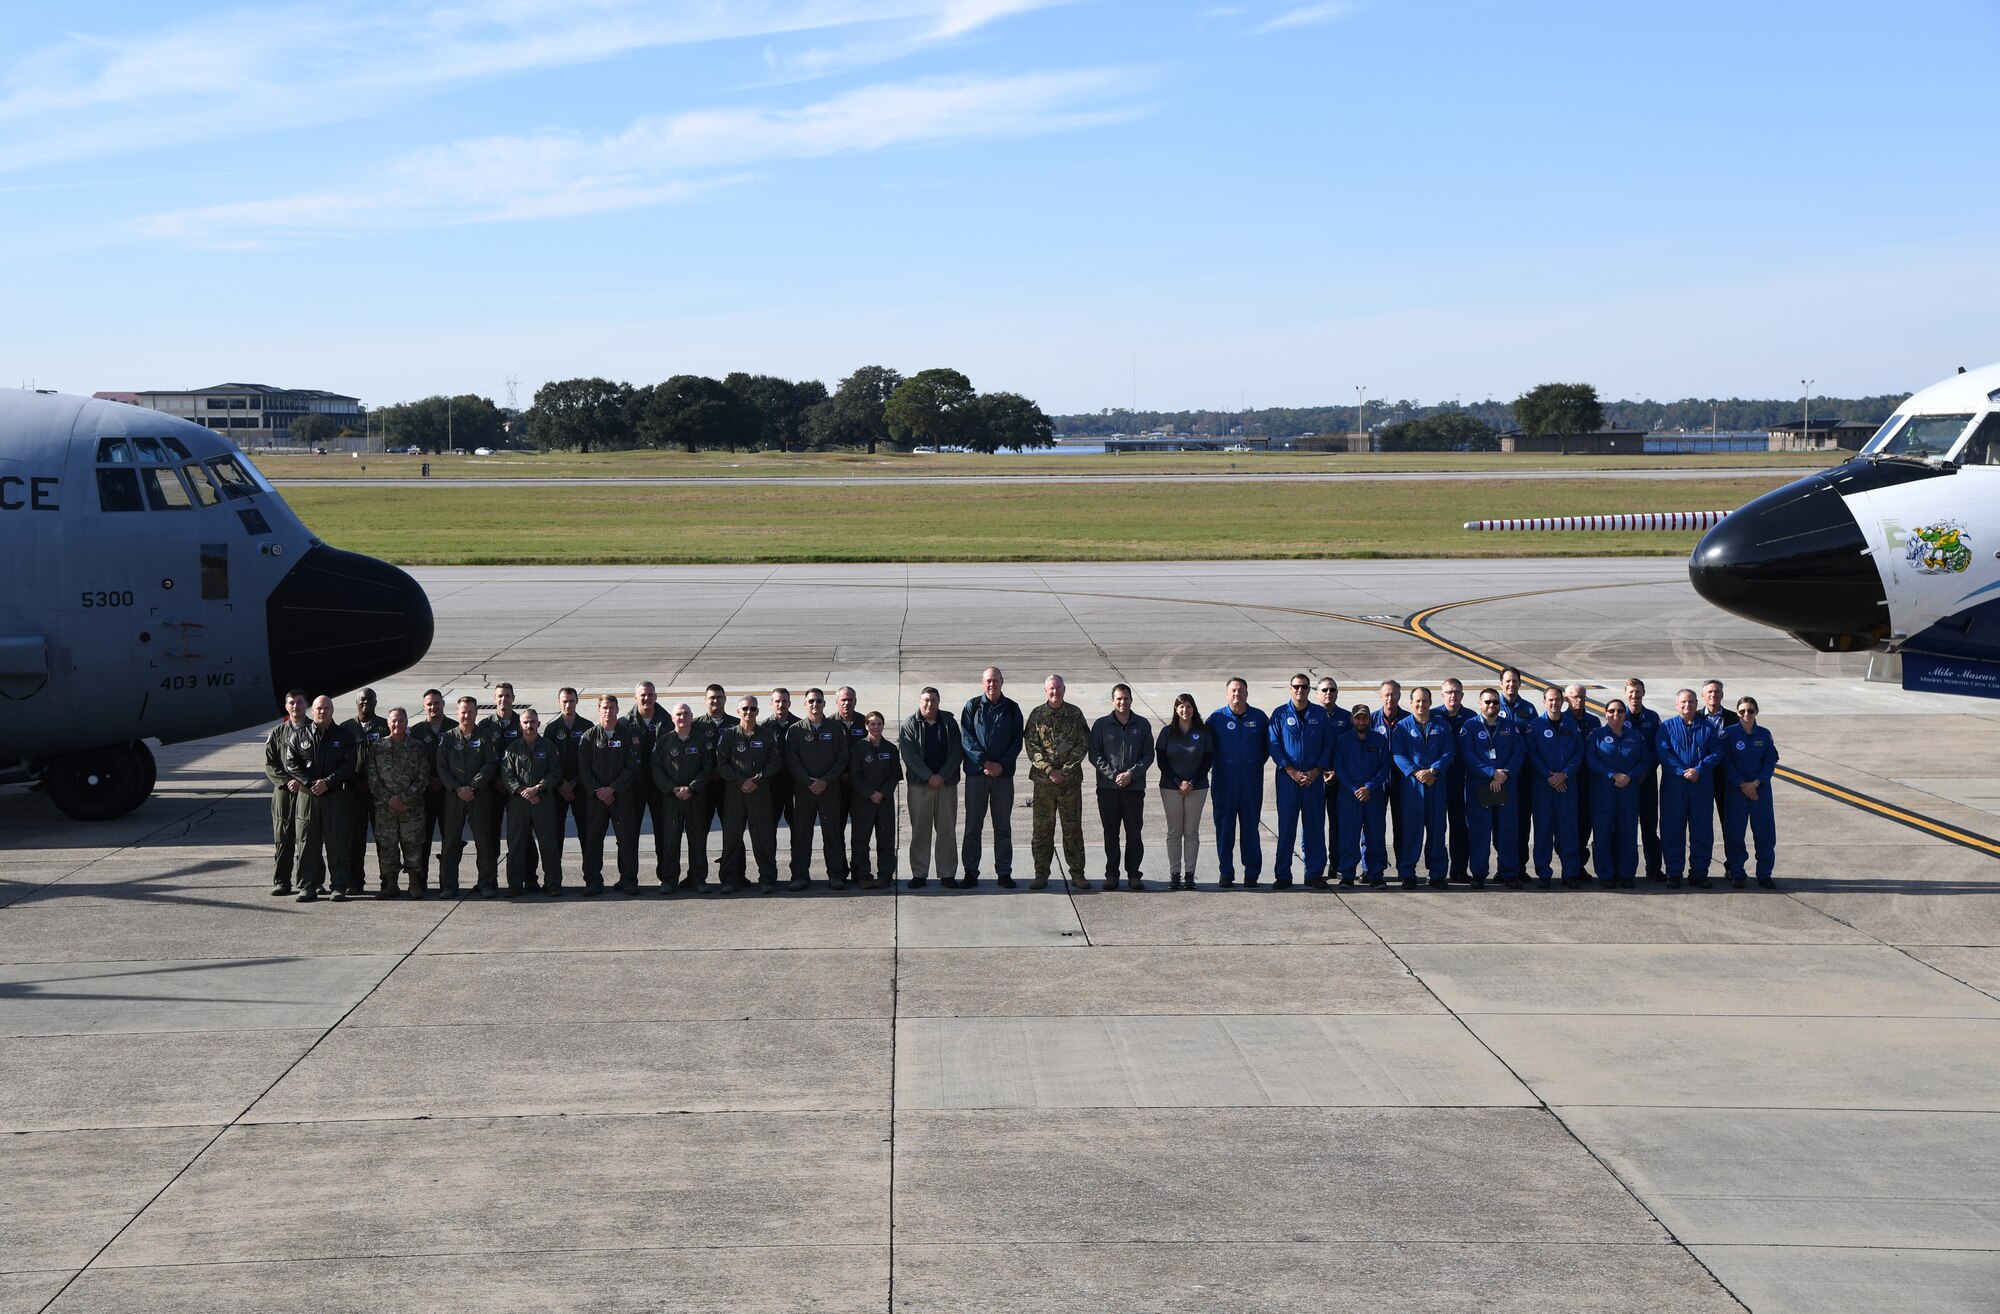 Members from the 53rd Weather Reconnaissance Squadron National Oceanic and Atmospheric Administration, National Hurricane Center, National Center for Atmospheric Research and the Chief, Aerial Reconnaissance Coordination, All Hurricanes pose for a group photo Nov. 13, 2019 on the flightline at Keesler, Air Force Base, Miss.